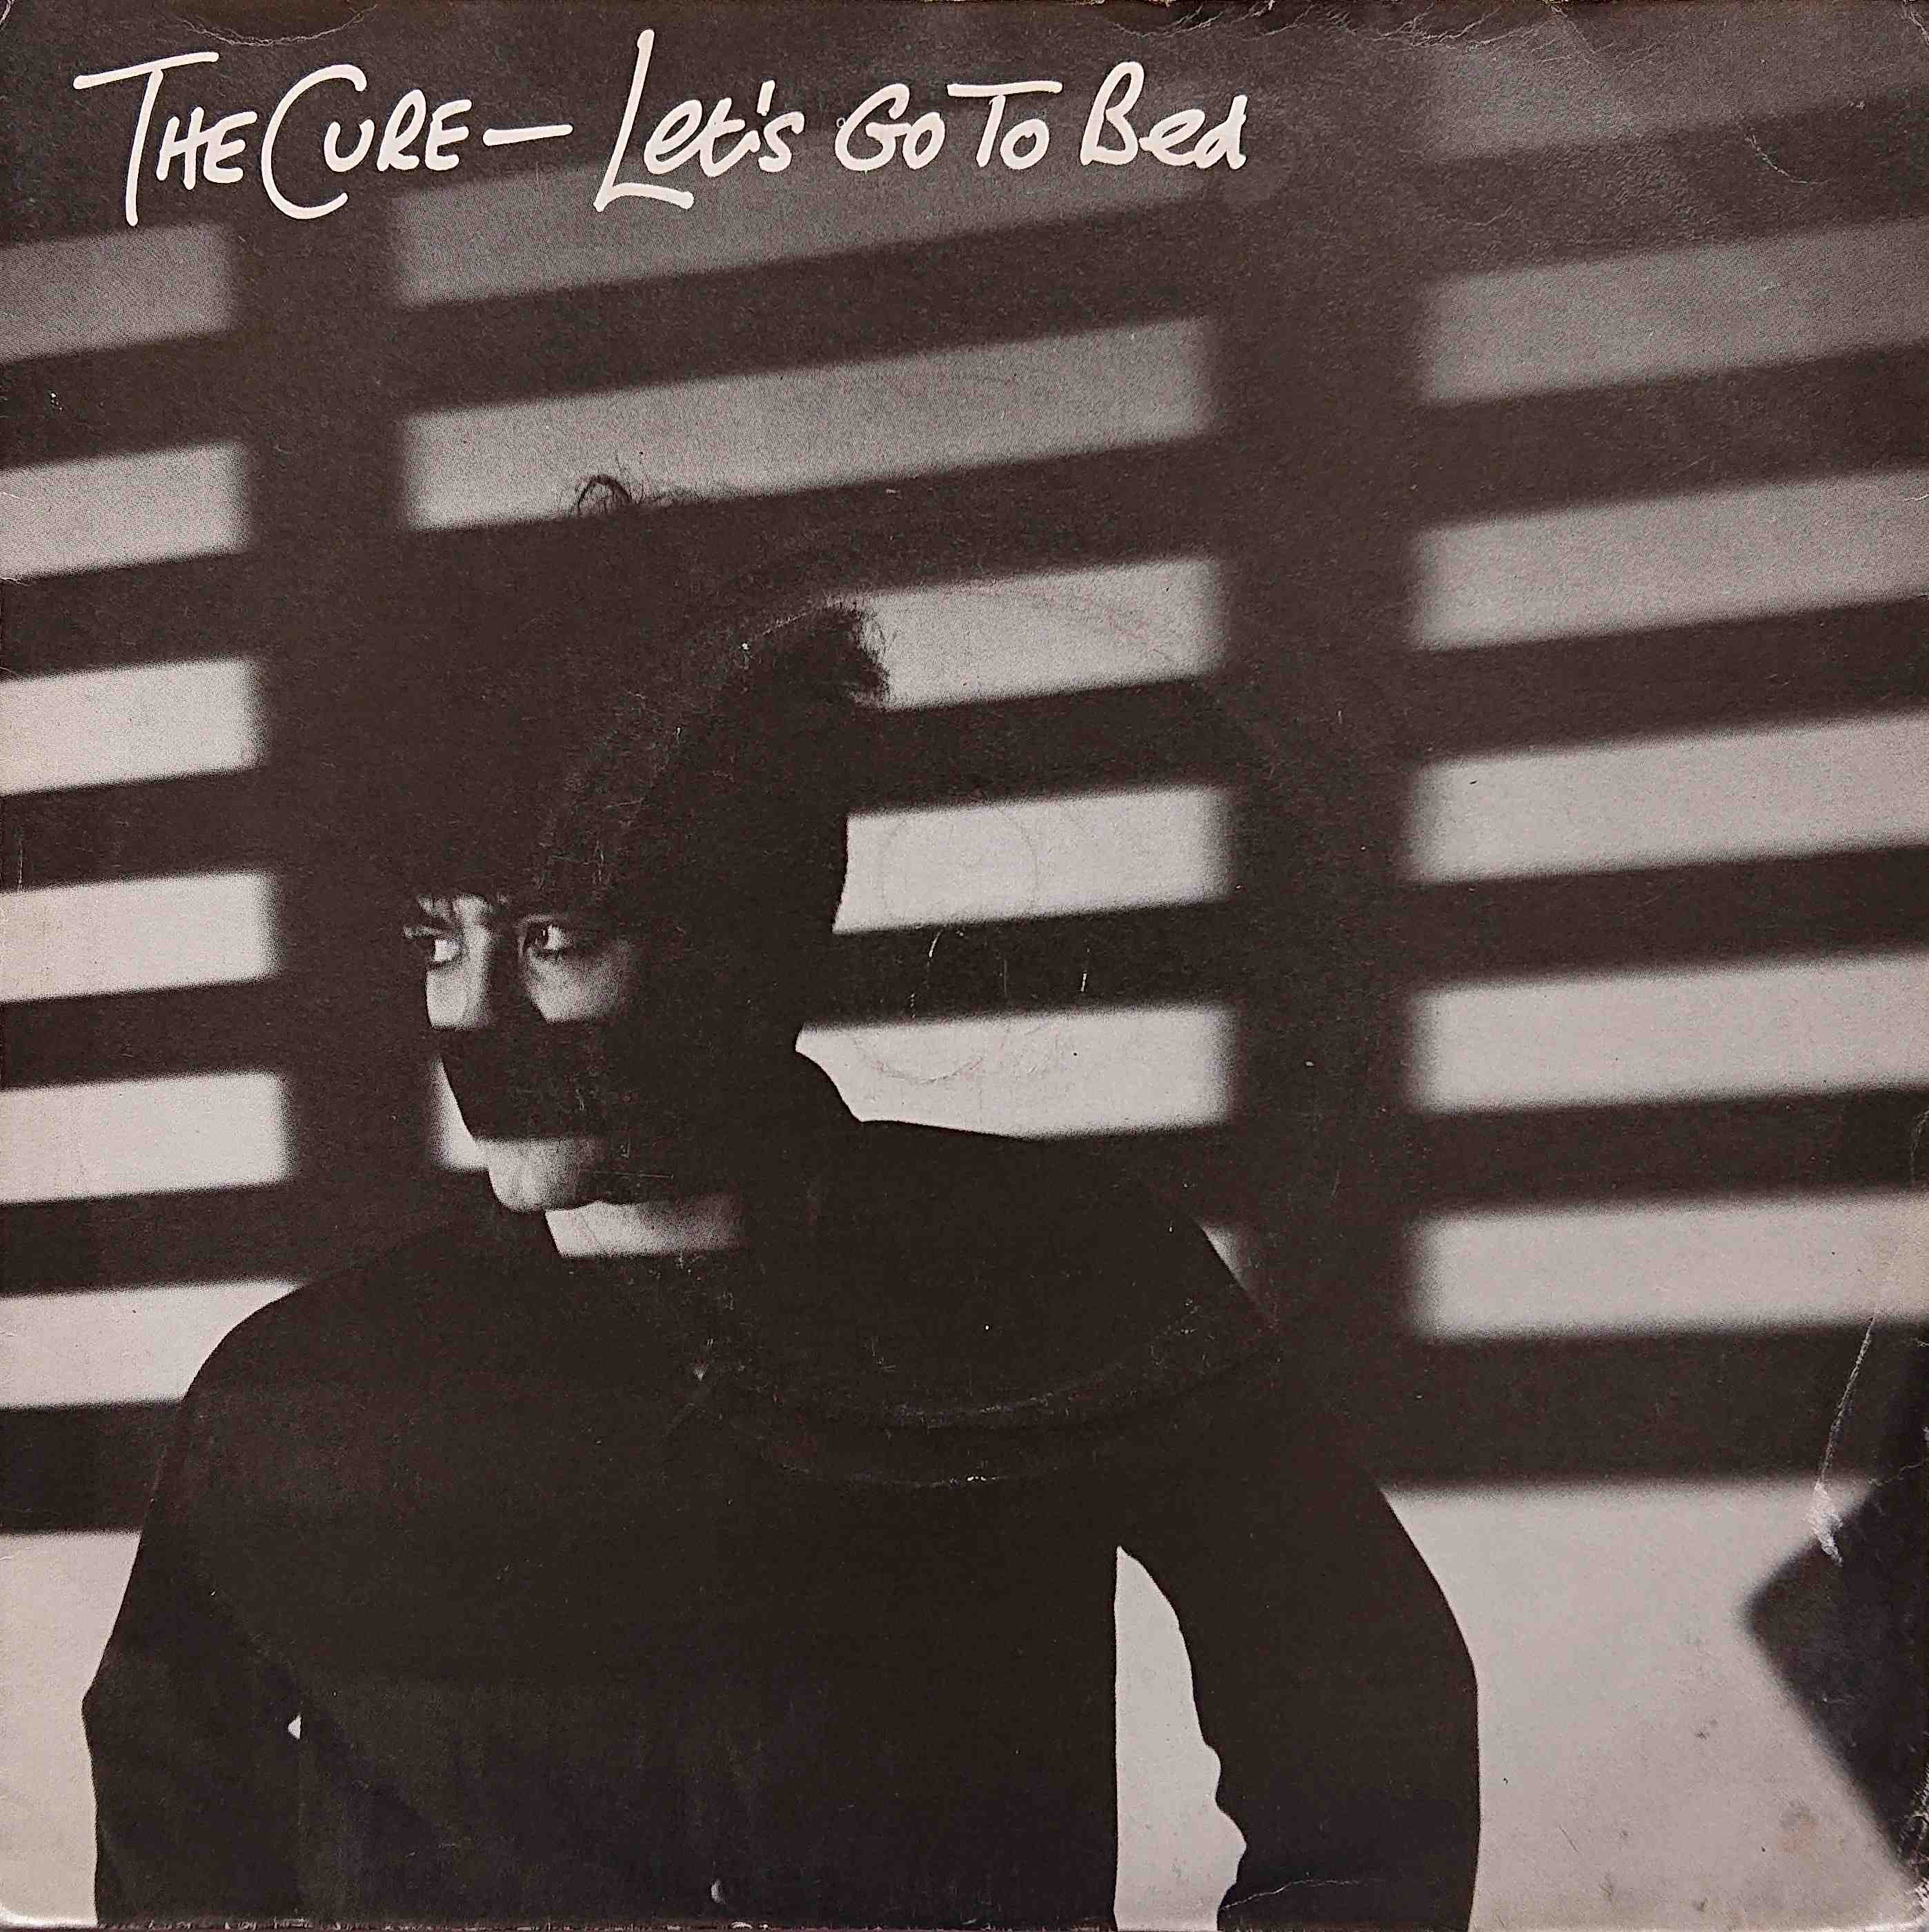 Picture of Let's go to bed by artist The Cure 